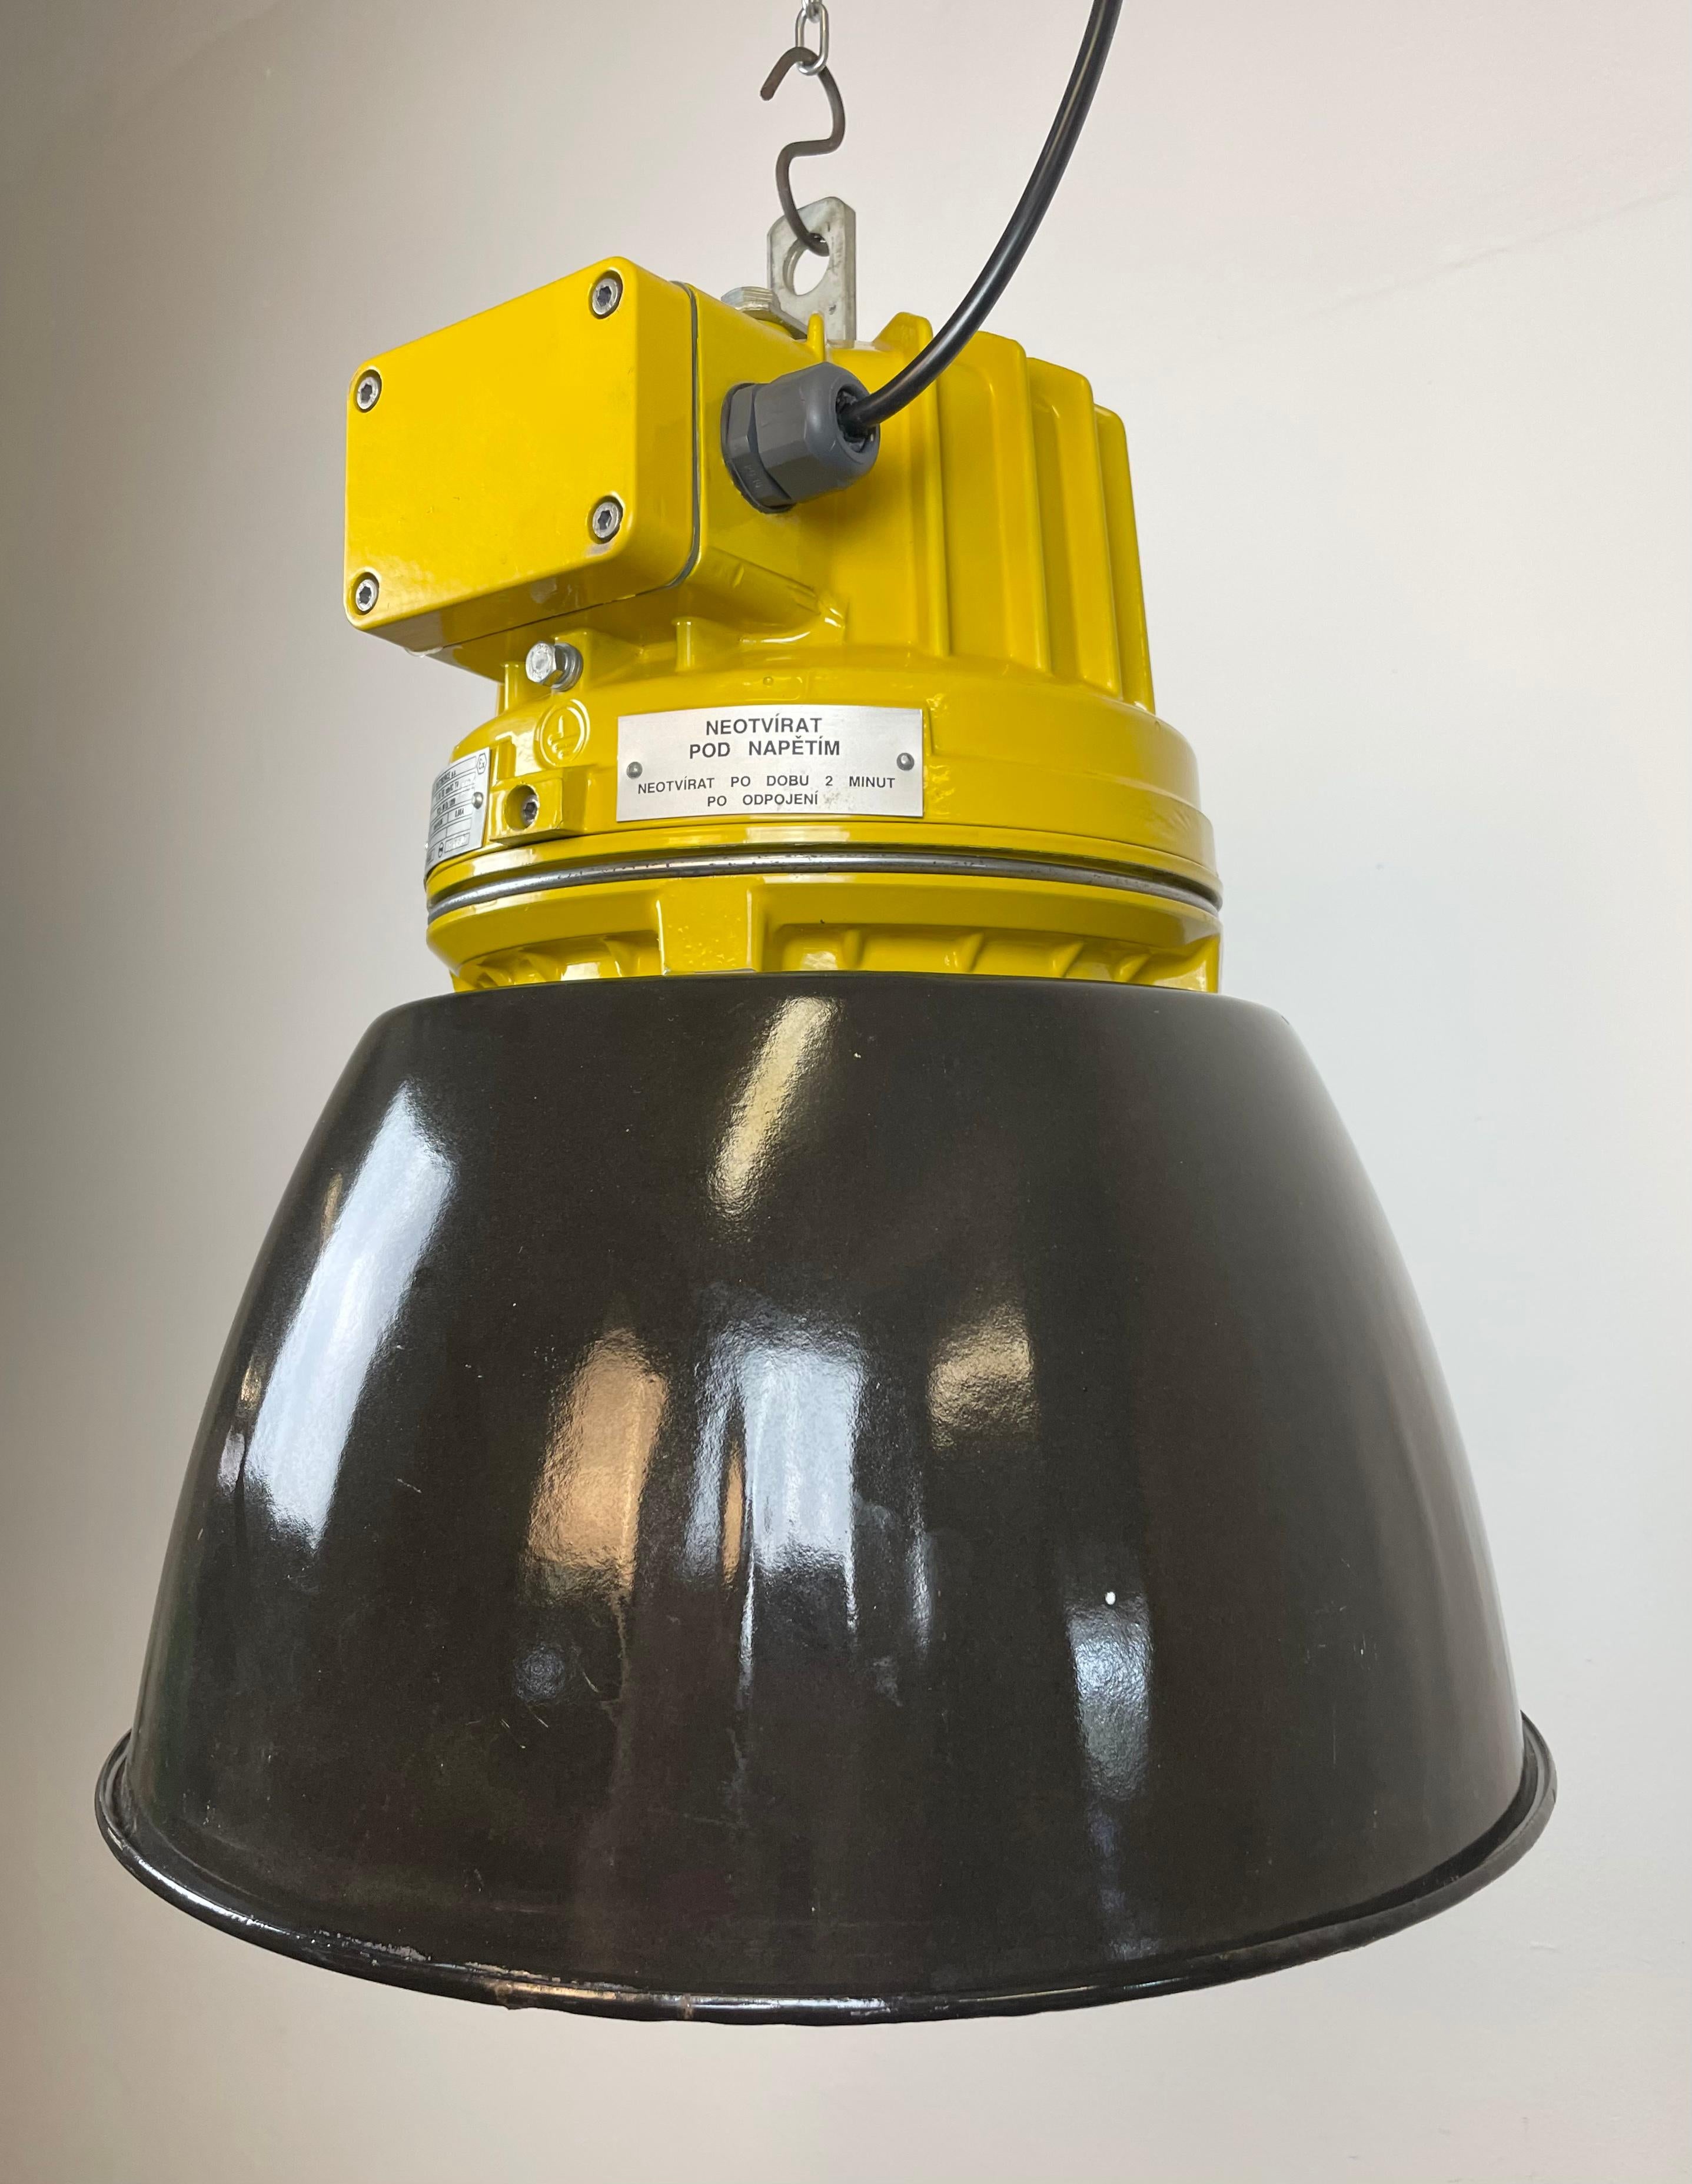 Late 20th Century Yellow Industrial Explosion Proof Lamp with Black Enameled Shade, 1990s